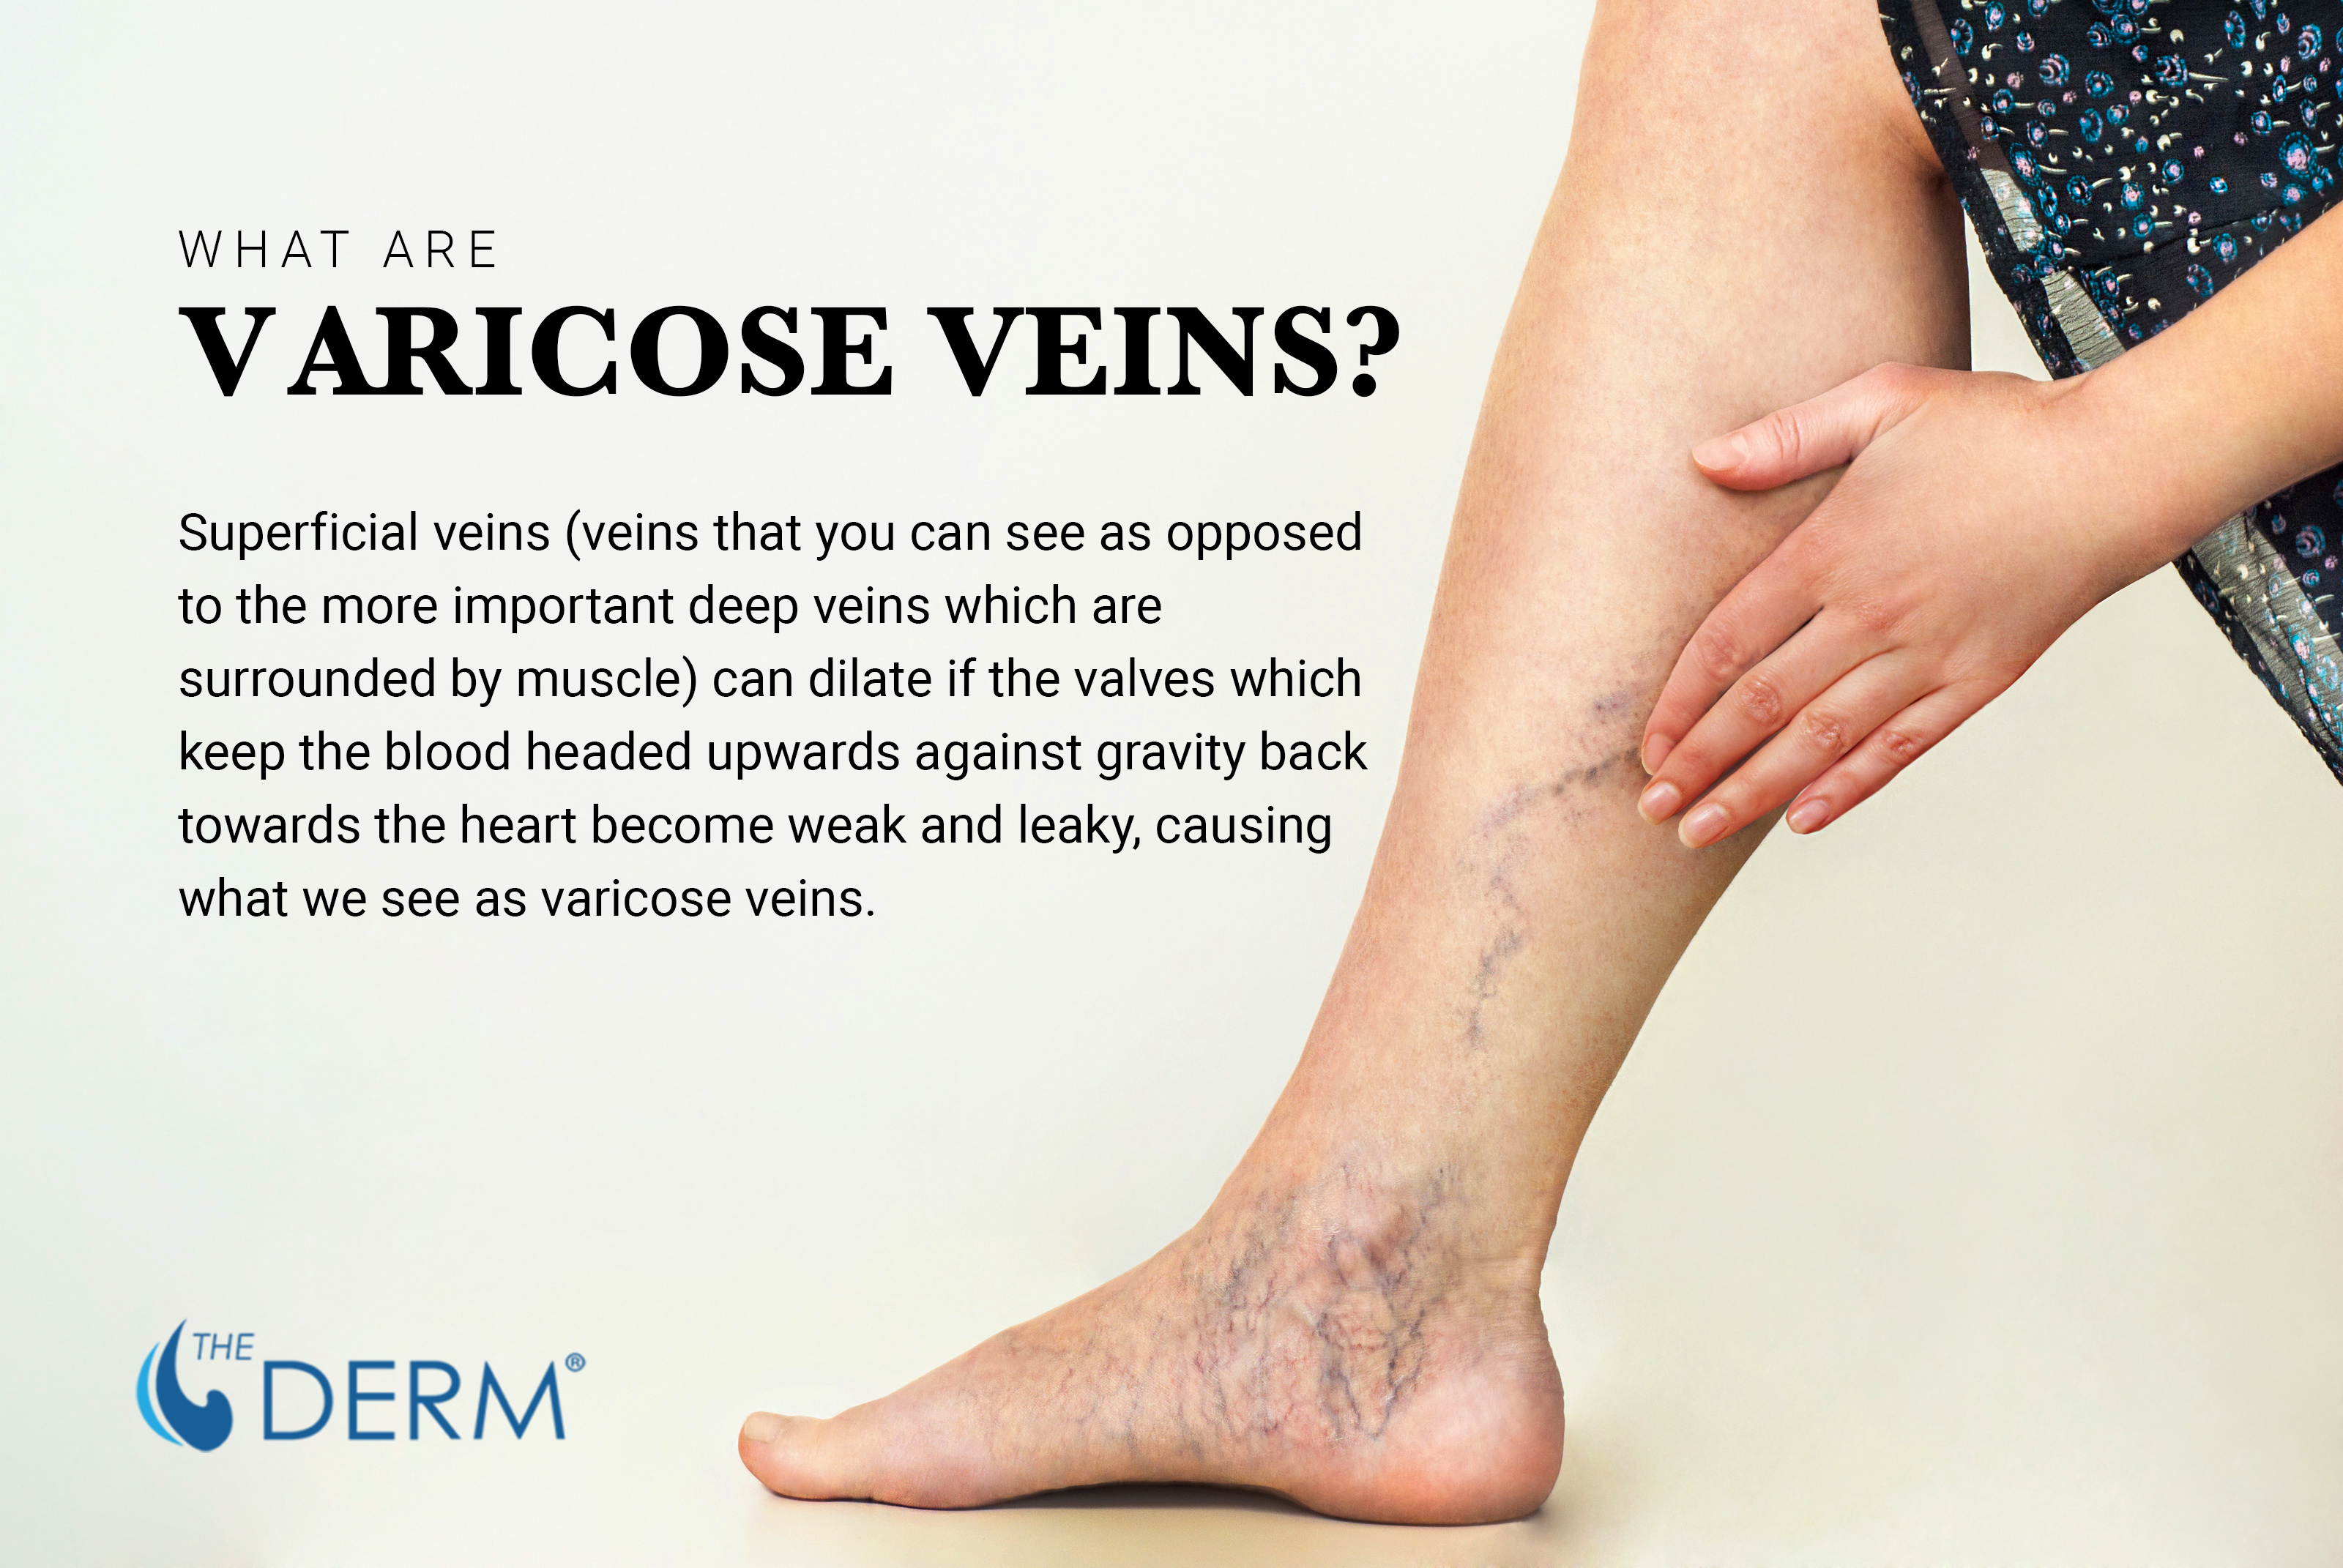 Varicose veins? Cold sores? The answer's easy peasy, lemon squeezy | Daily Mail Online